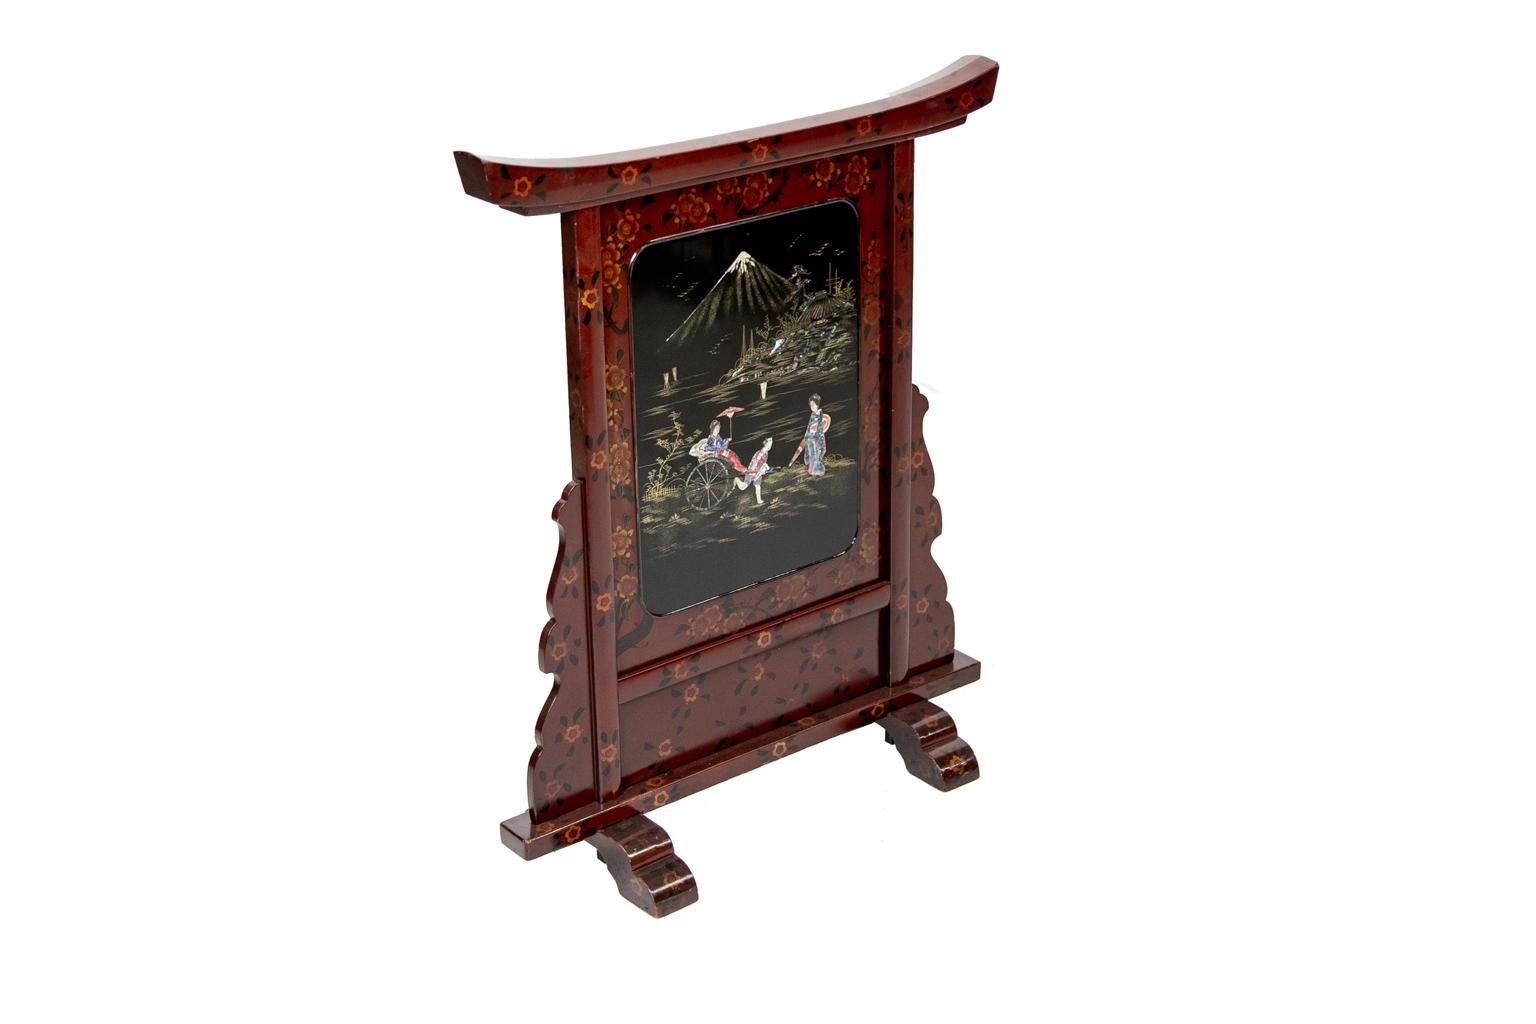 Japanese lacquered fire screen has a dark red lacquer background with floral borders around a central panel with painted mother of pearl figures. The figures depict man pulling a woman in a rickshaw with Mt. Fuji in the background. It is inlaid with